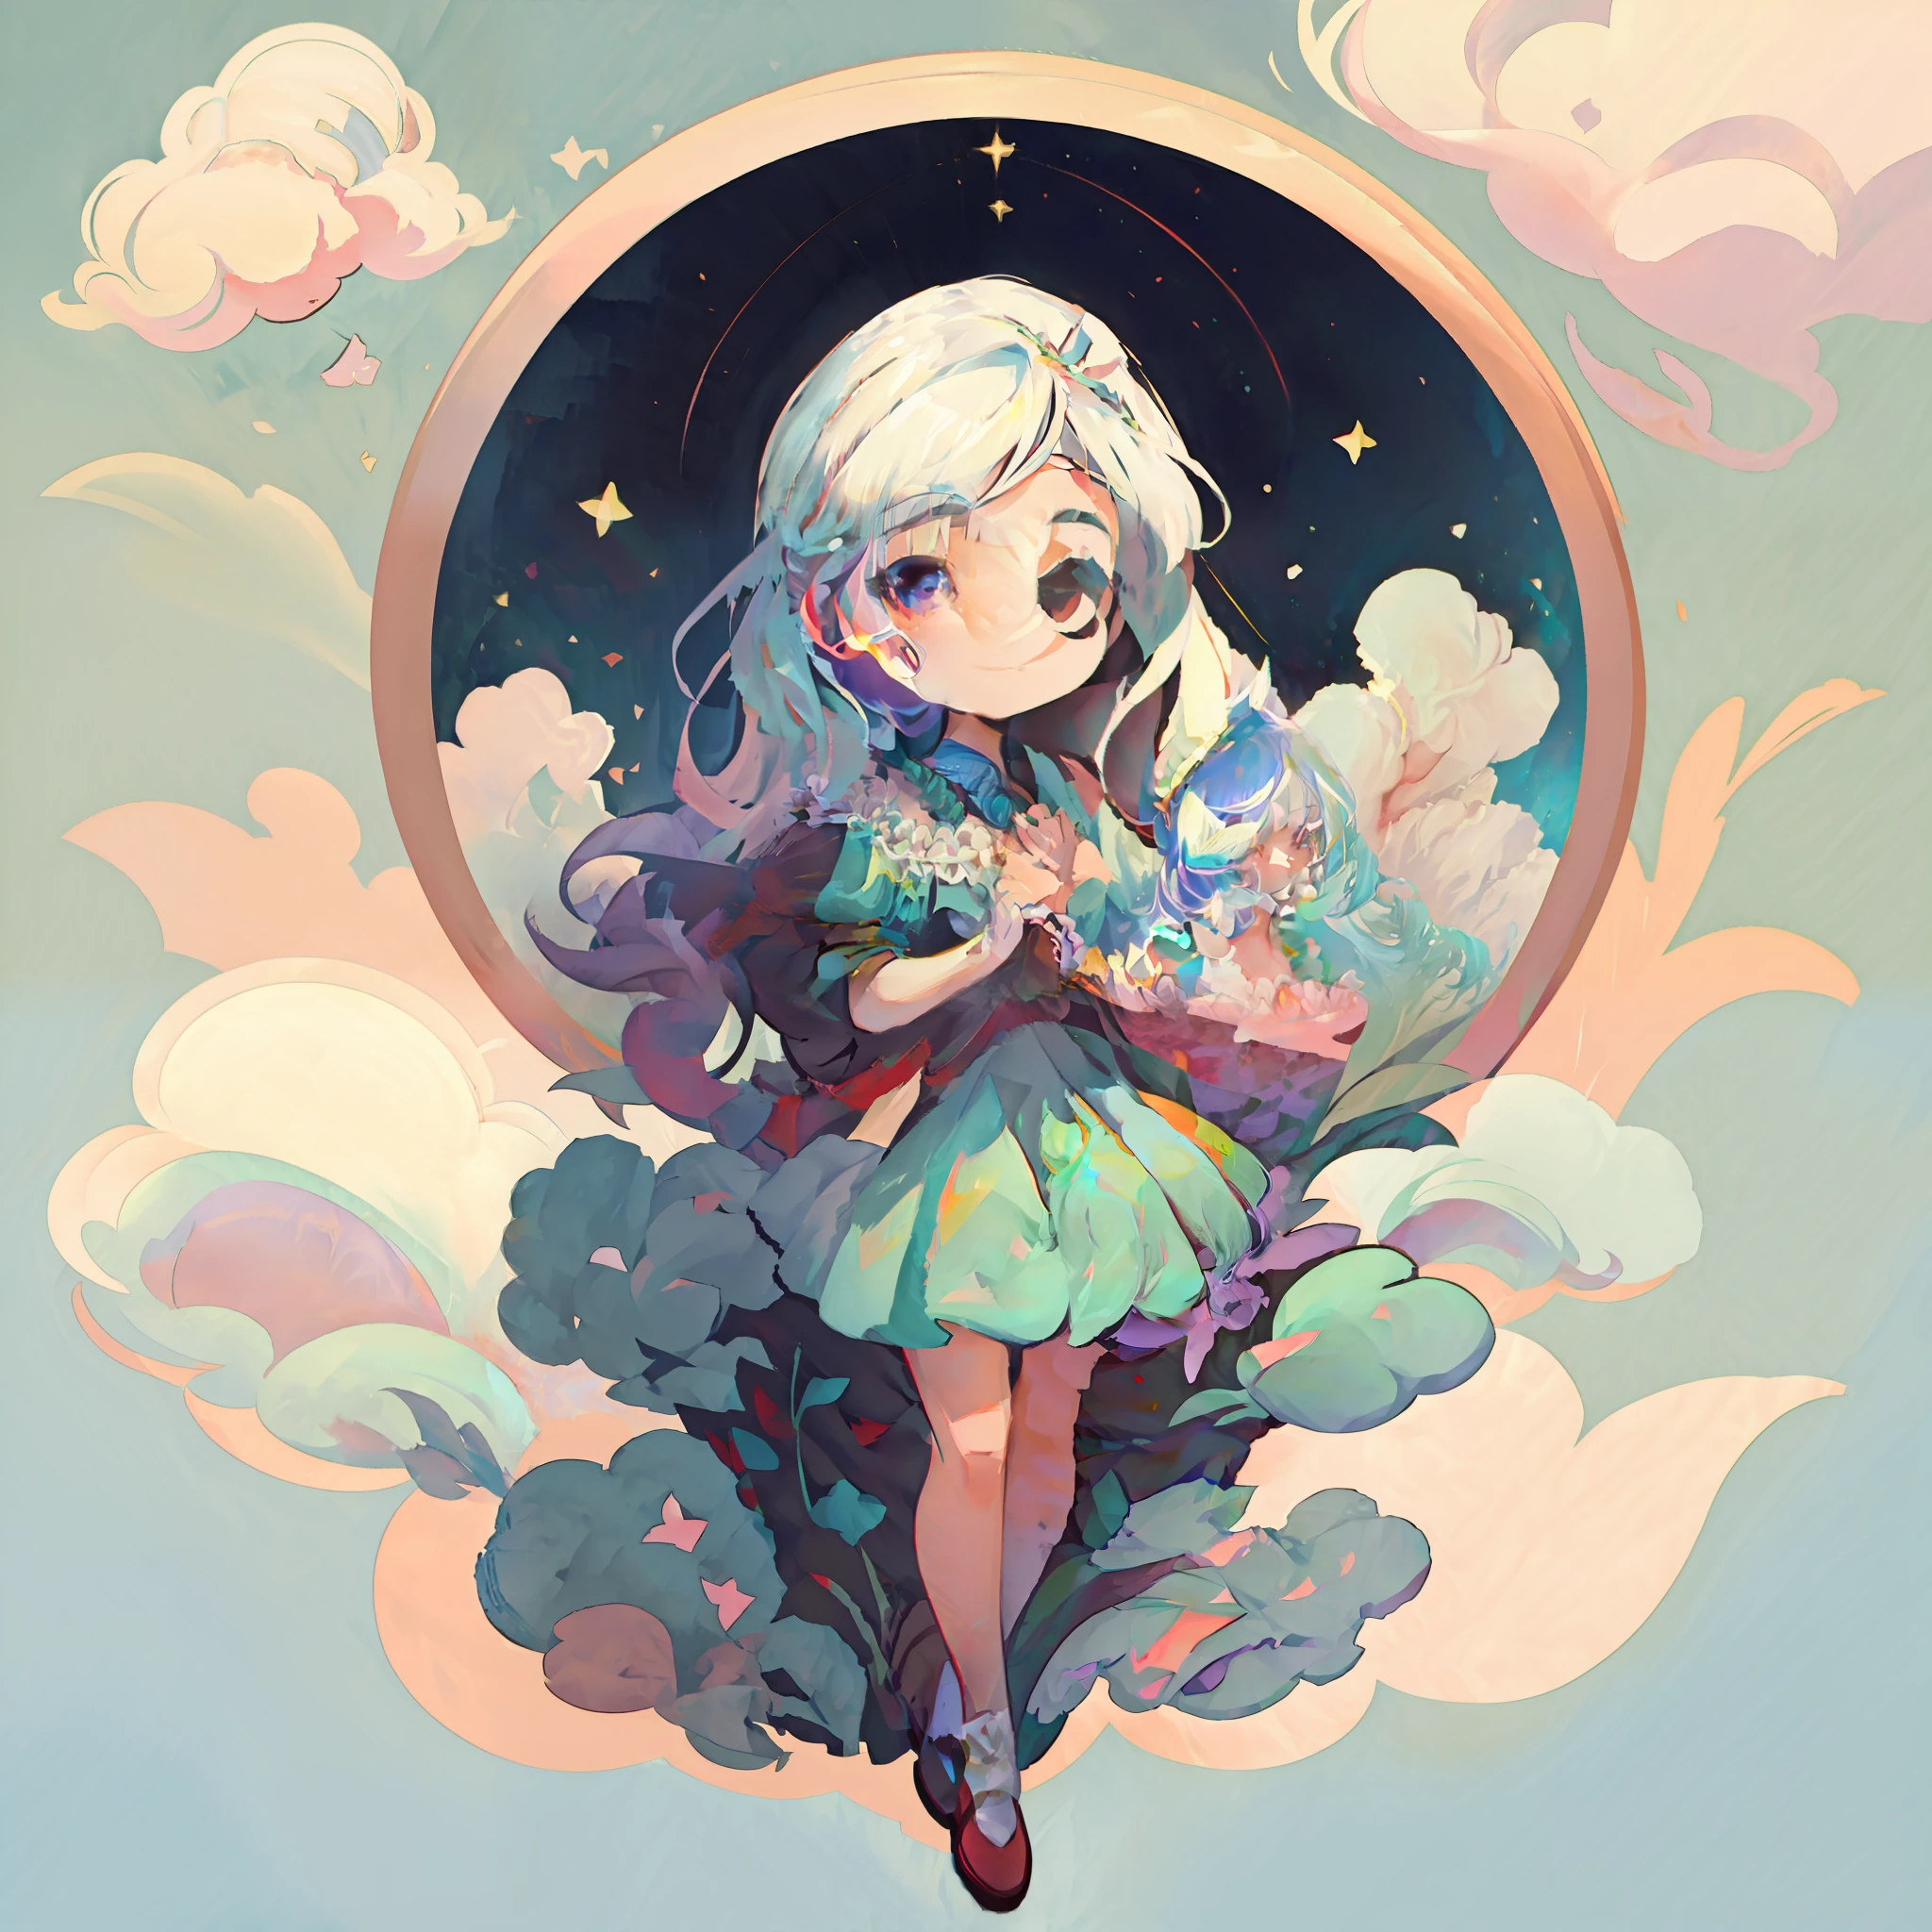 Anime girl with long white hair and blue dress holding a cat, Beautiful art style, cute detailed digital art, Loish art style, Amy Sol style, Goddess of the clouds, blonde girl in a cosmic dress, Loish Van Baarle, anime style illustration, anime fantasy illustration, a beautiful artwork illustration, girls clouds, anime girl with cosmic hair, dreamy illustration